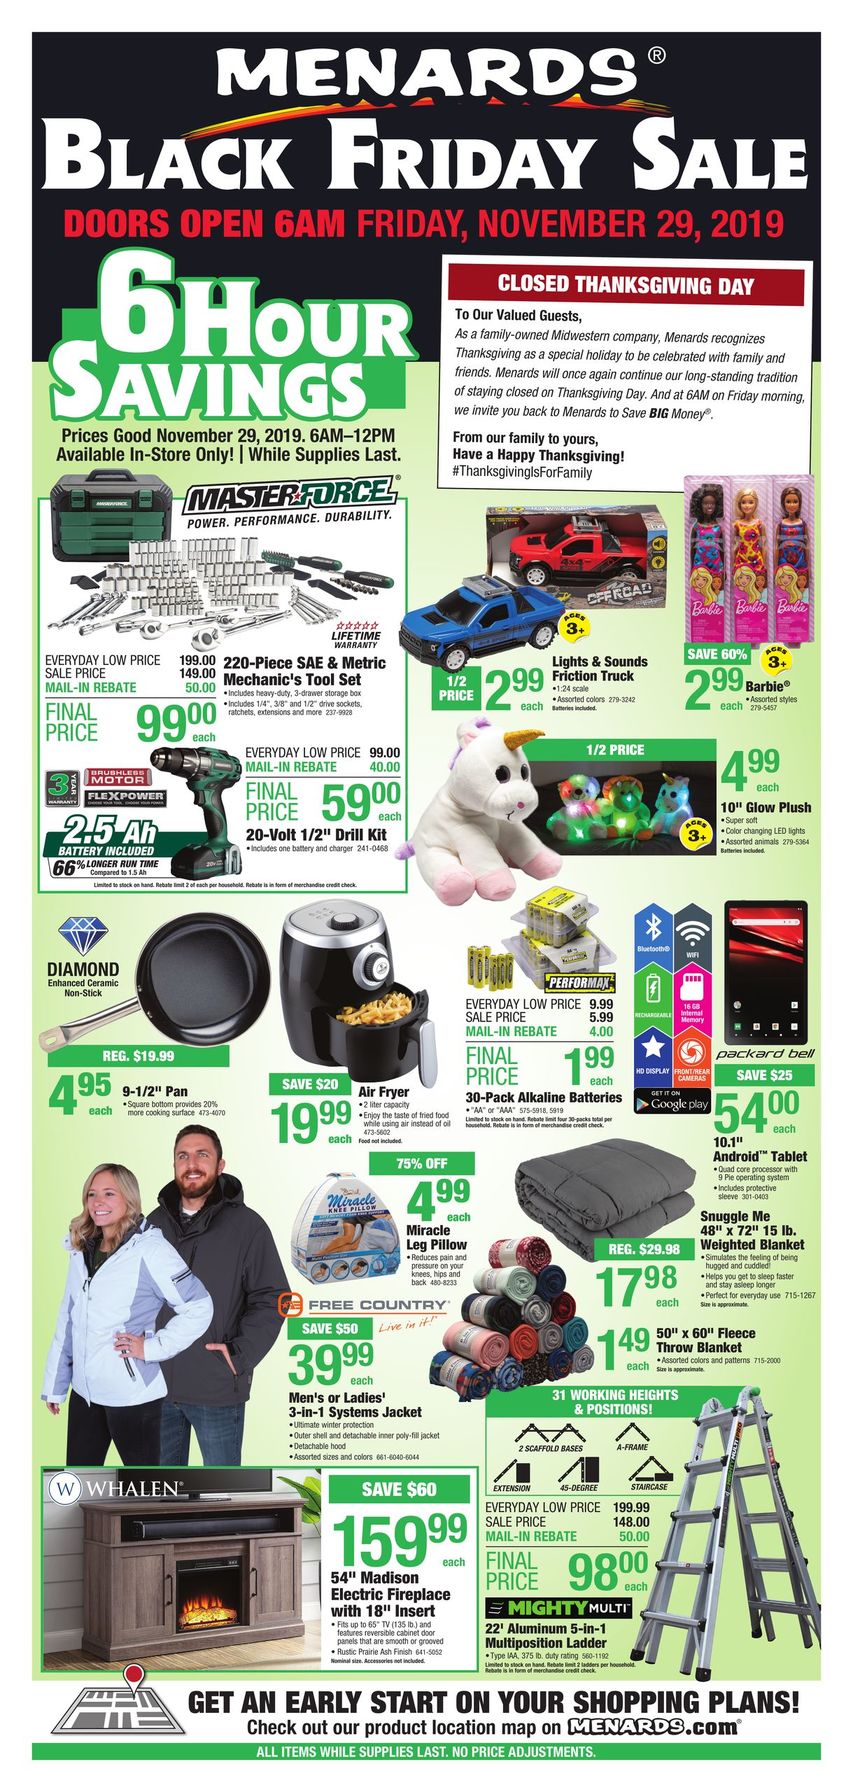 Menards black friday 2020 | 2019 Menards Black Friday Deals, Sale, Ad & Hours. 2019-12-23